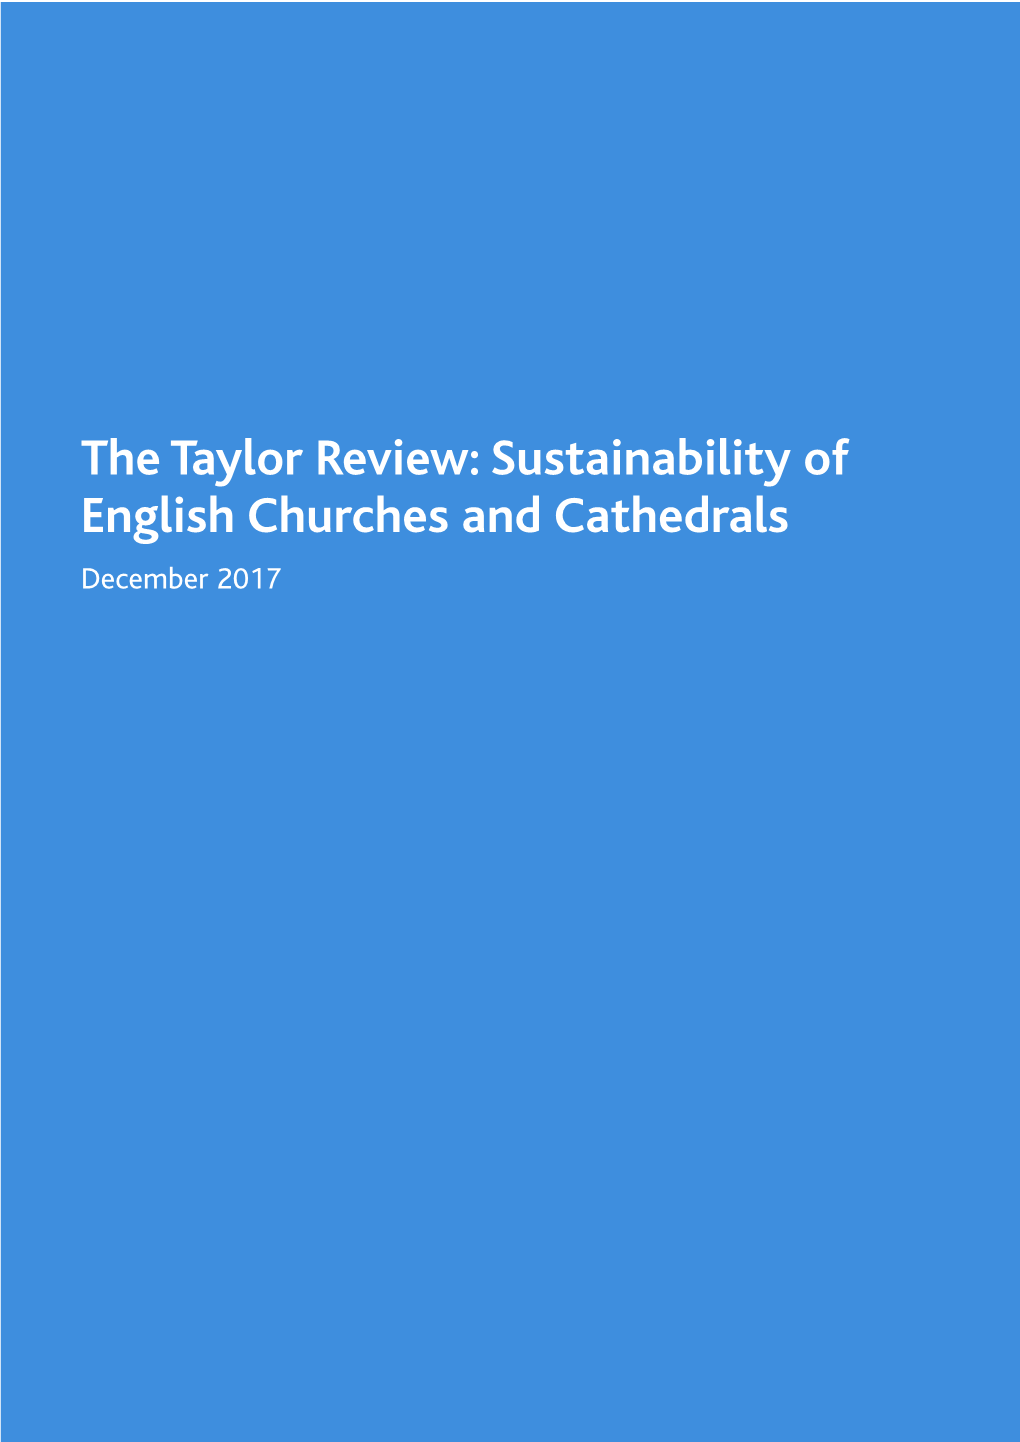 The Taylor Review: Sustainability of English Churches and Cathedrals